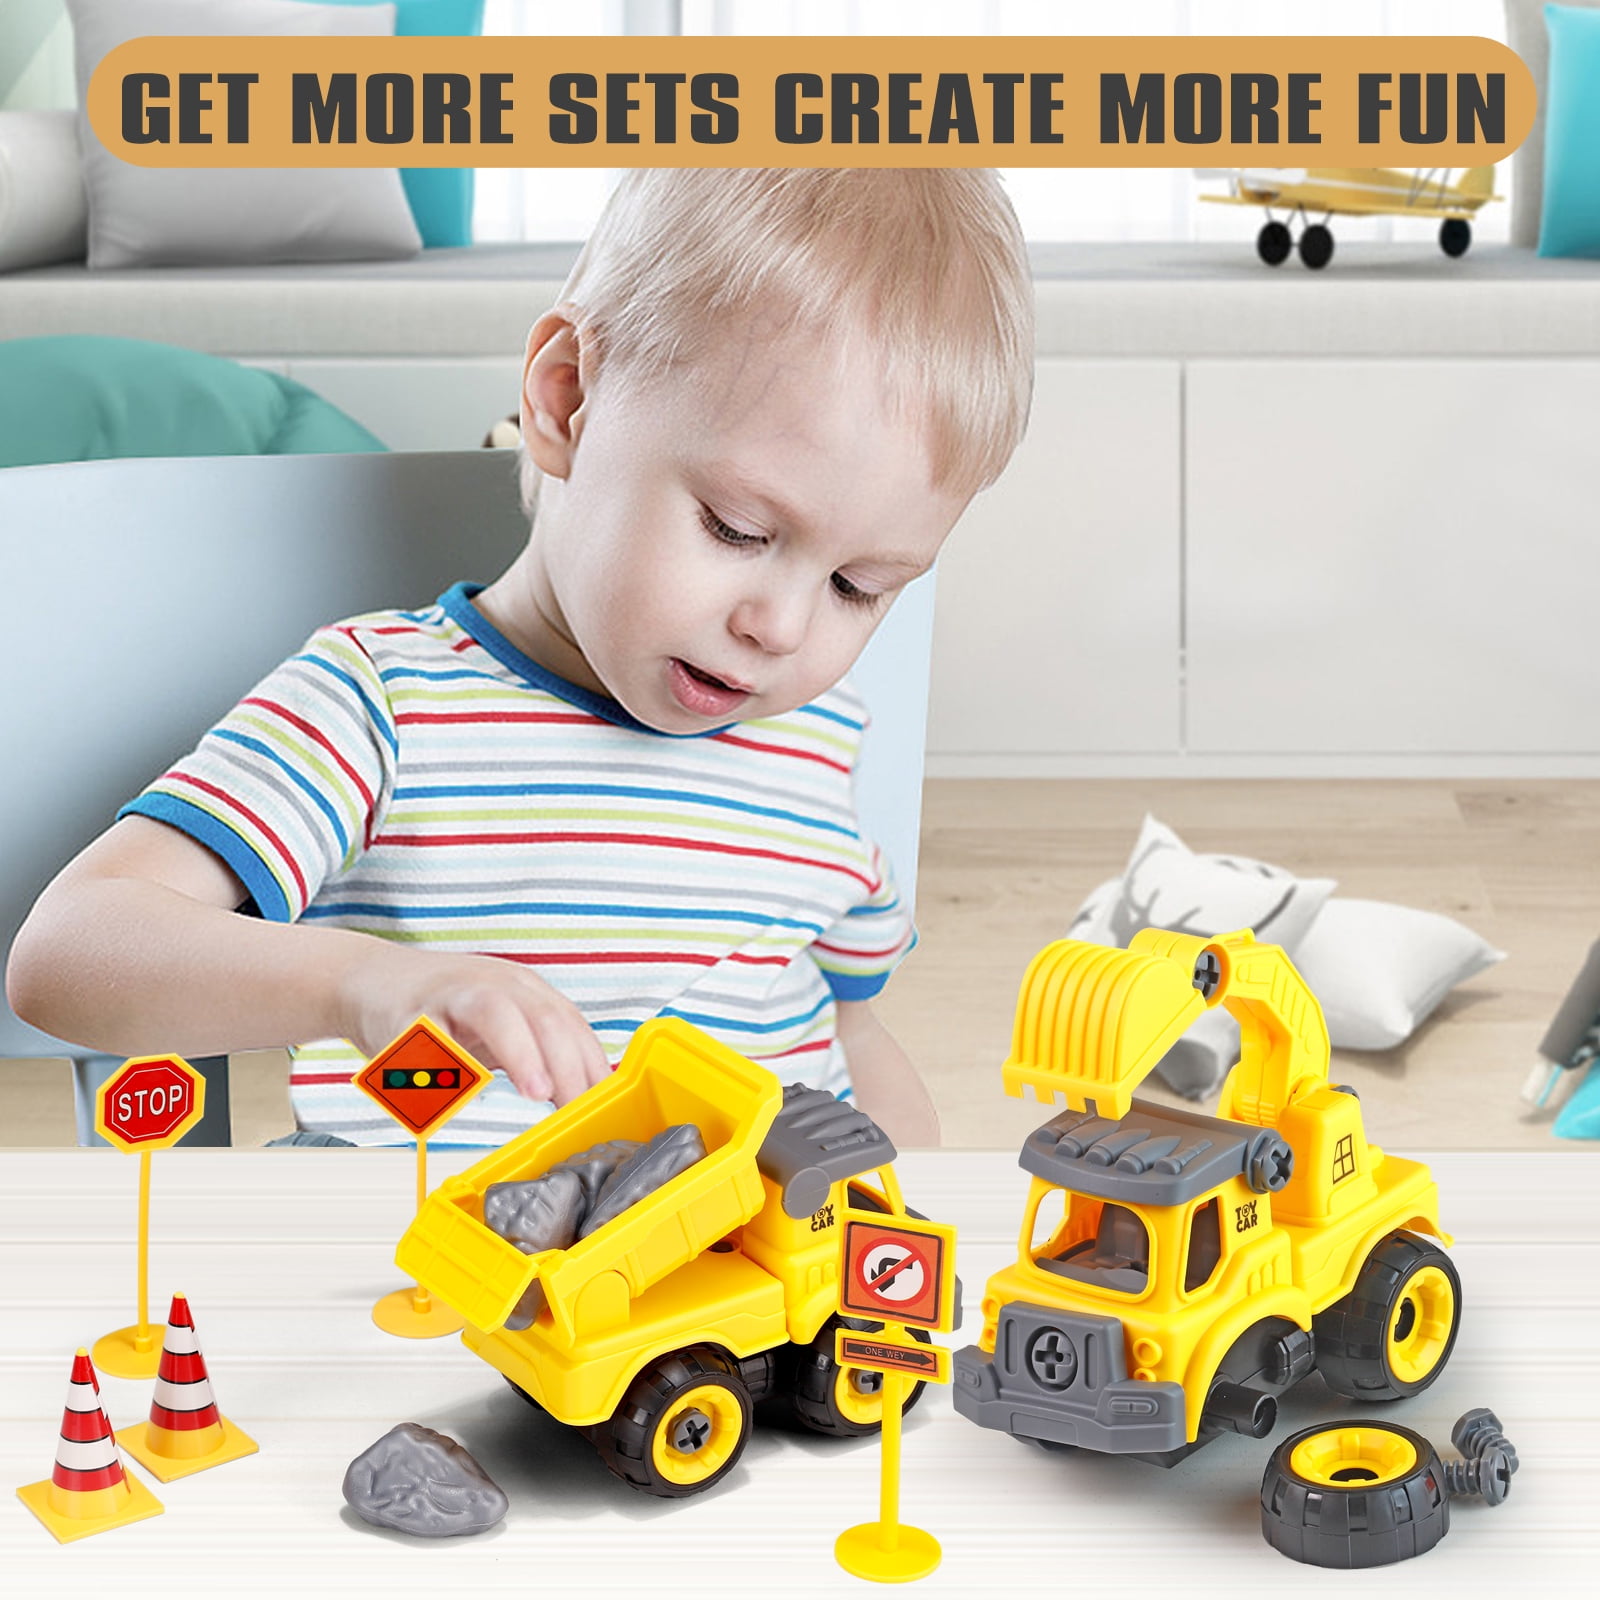 Toys for Boys 3-6 Years Take Apart Construction Trucks 8 Cars Toys